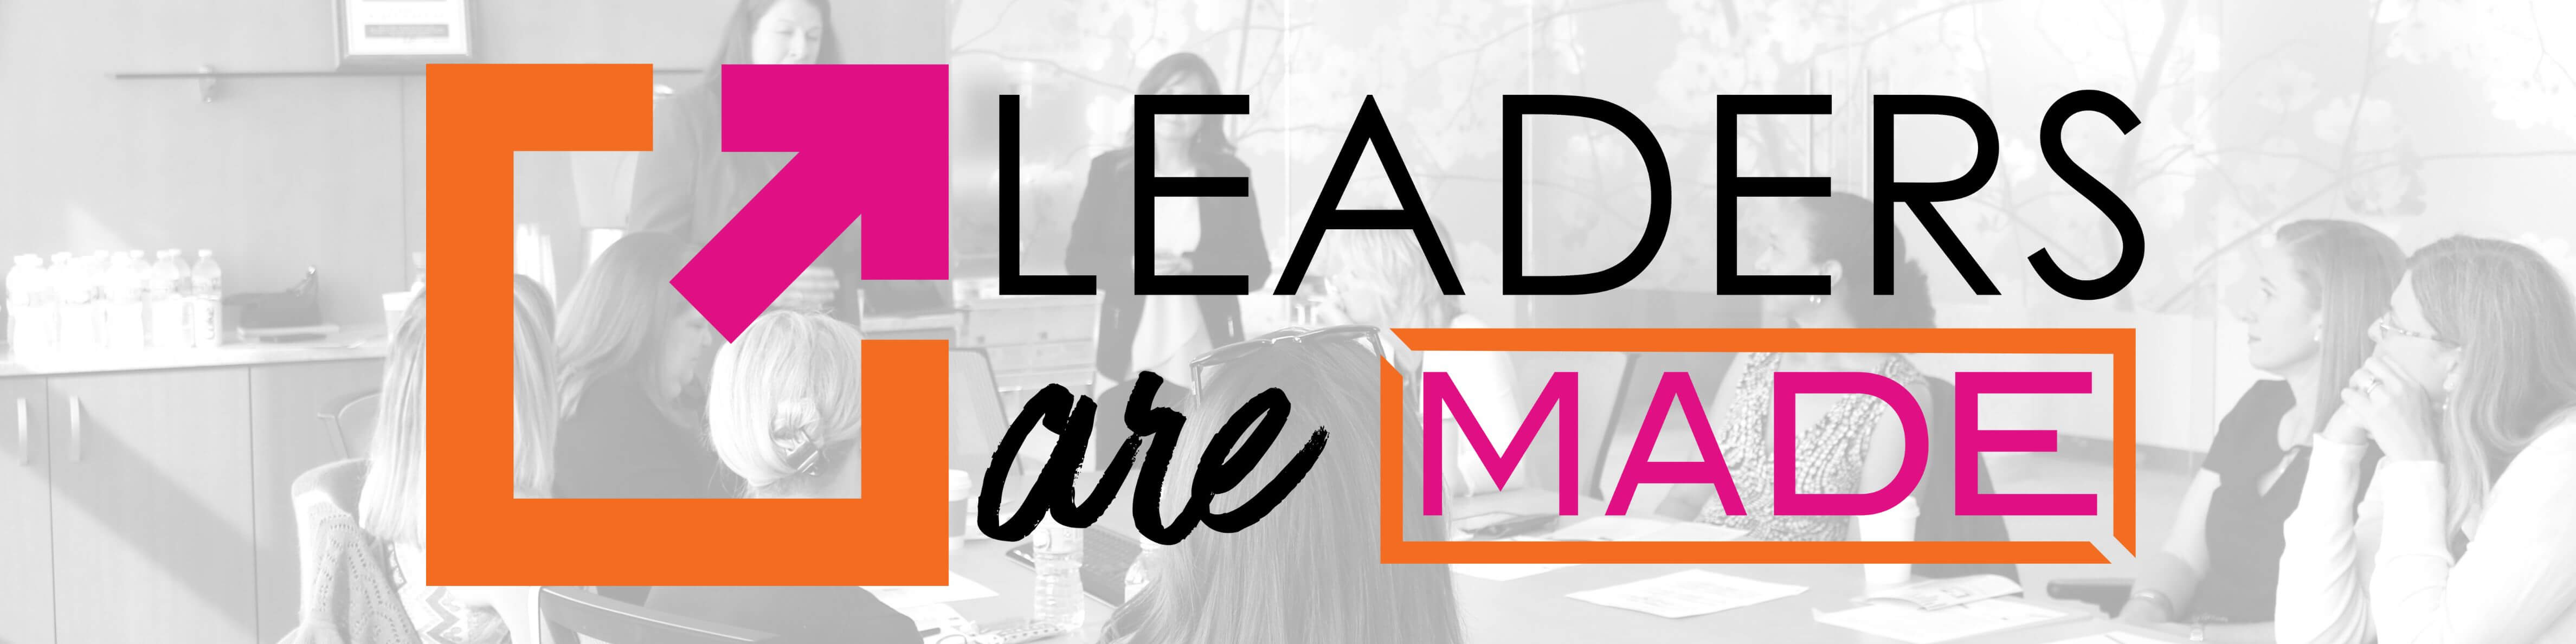 Leaders are MADE image with logo on top